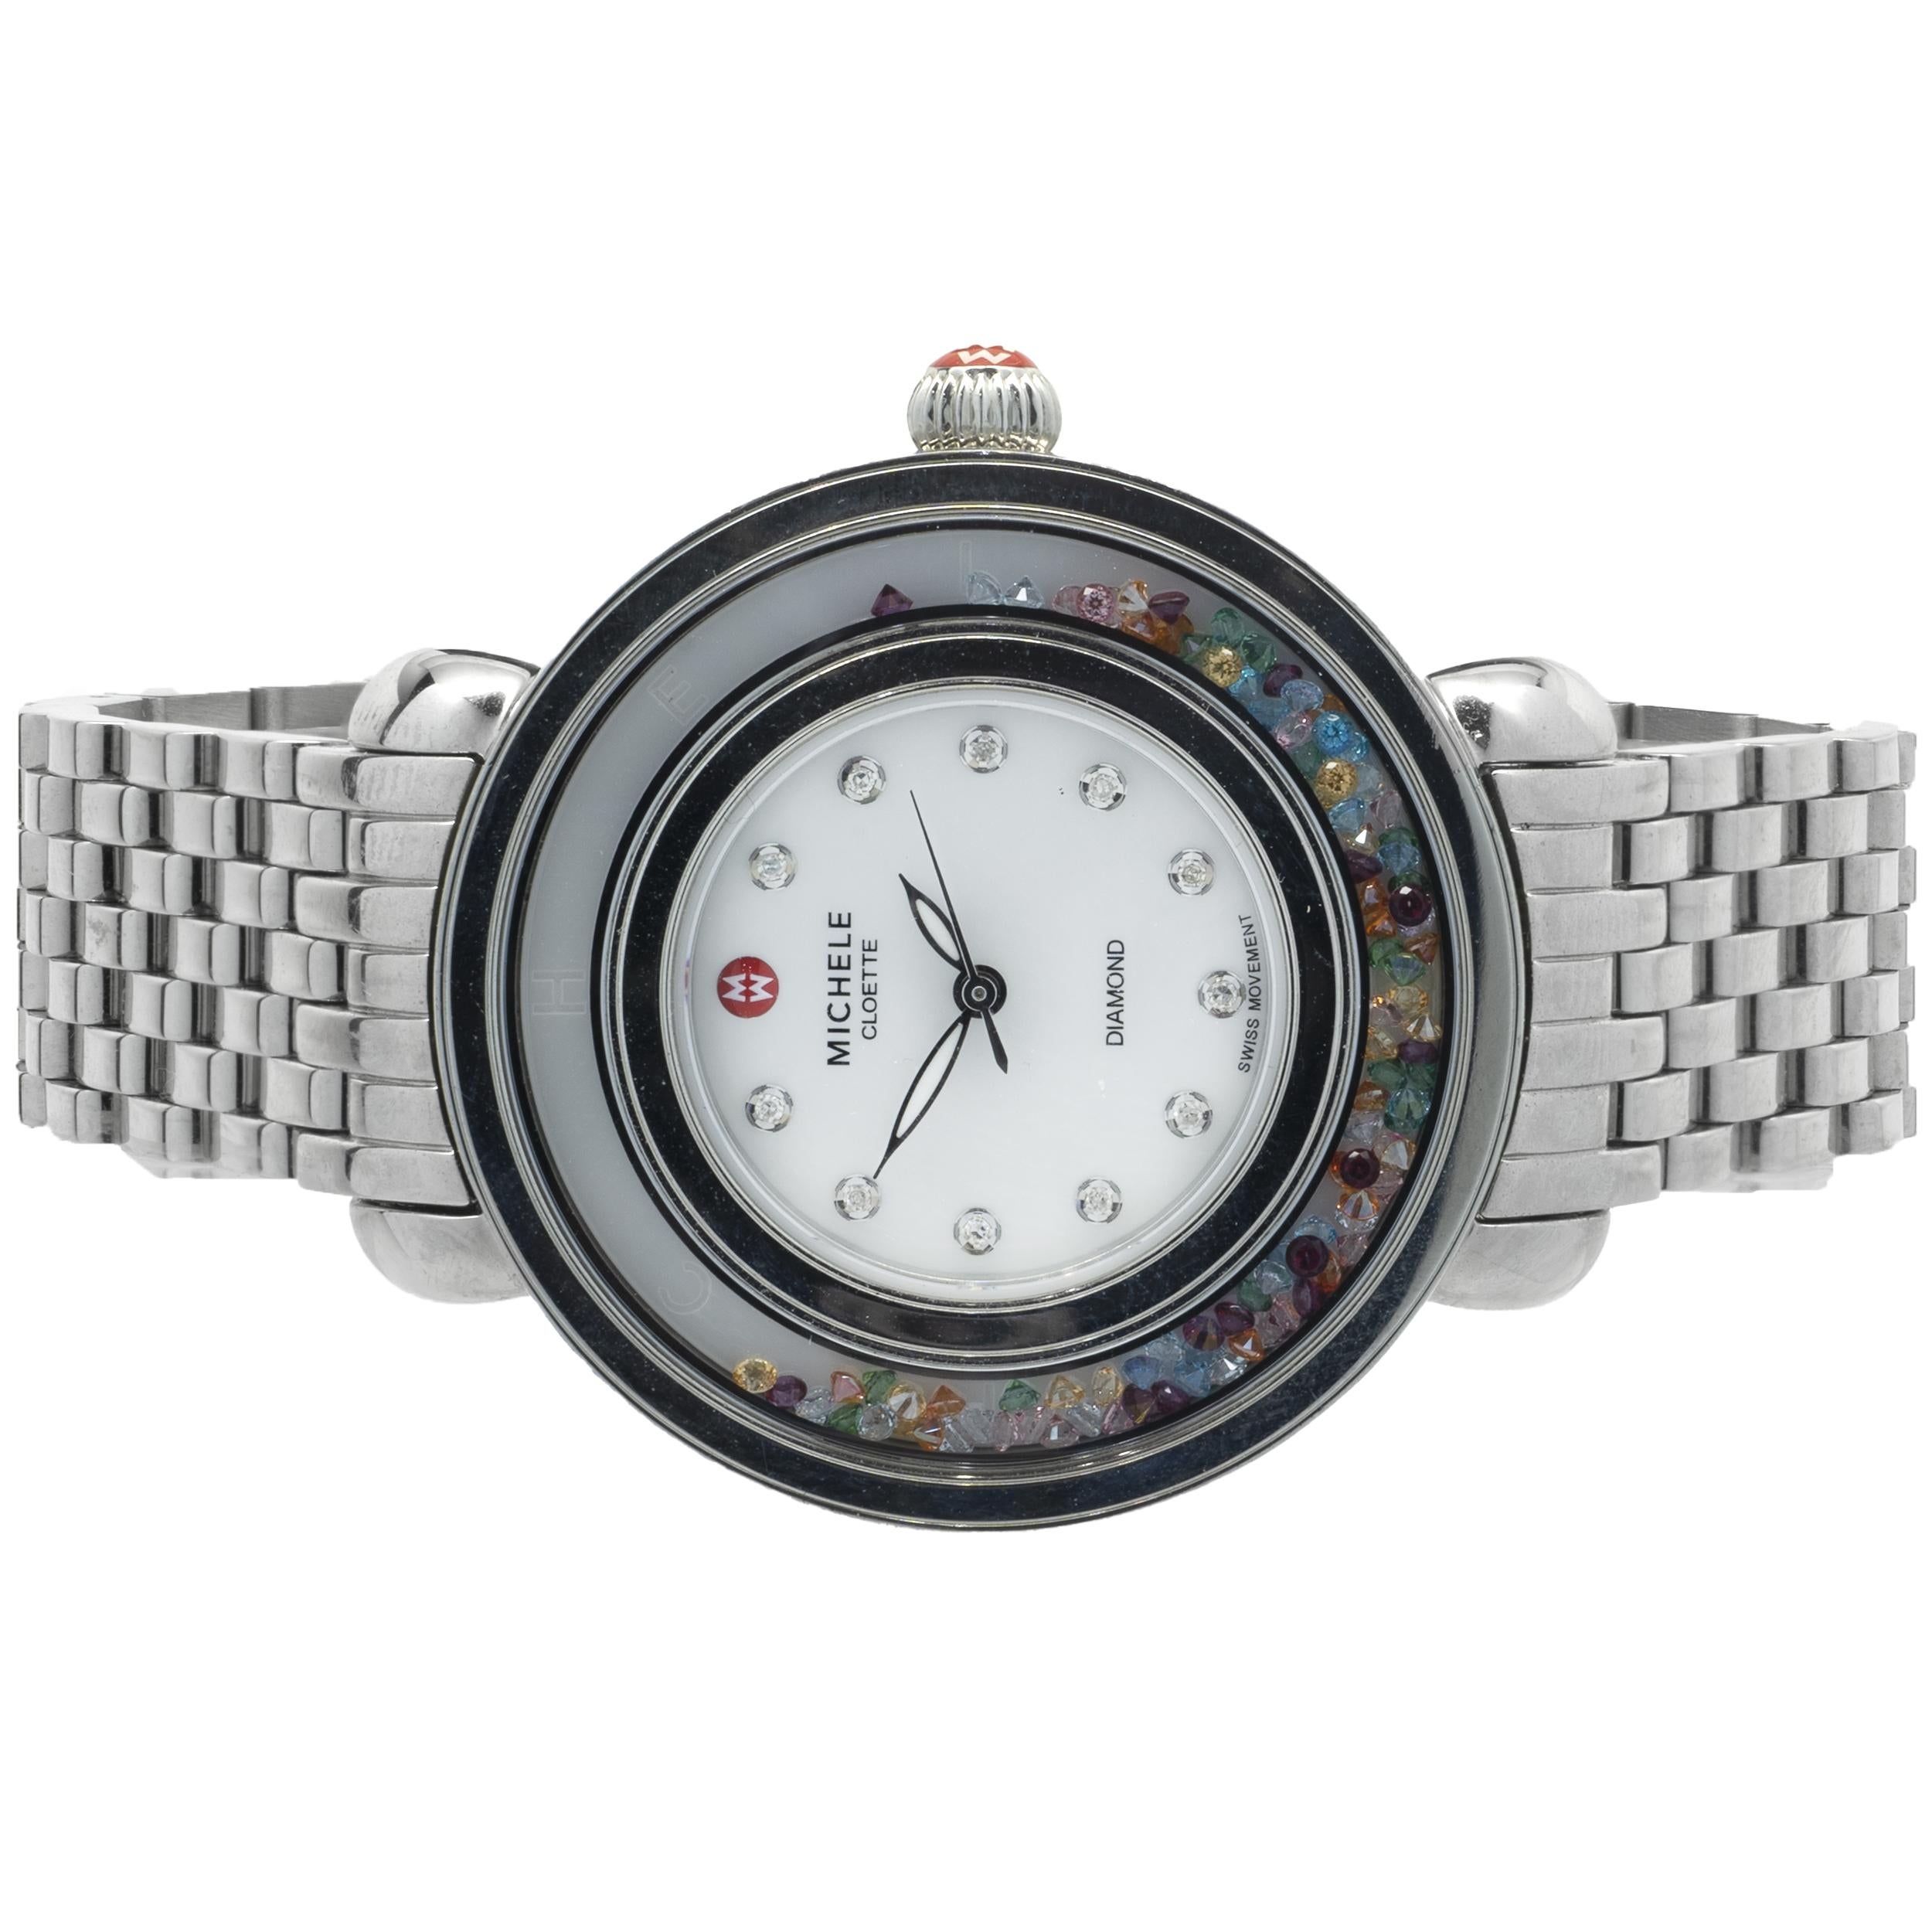 Movement: quartz
Function: hours, minutes, seconds
Case: 38mm stainless round case, floating multi colored topaz bezel, sapphire crystal
Dial: white diamond mother of pearl dial 
Band: stainless steel mesh bracelet
Serial #: HF0021XXX
Reference #: